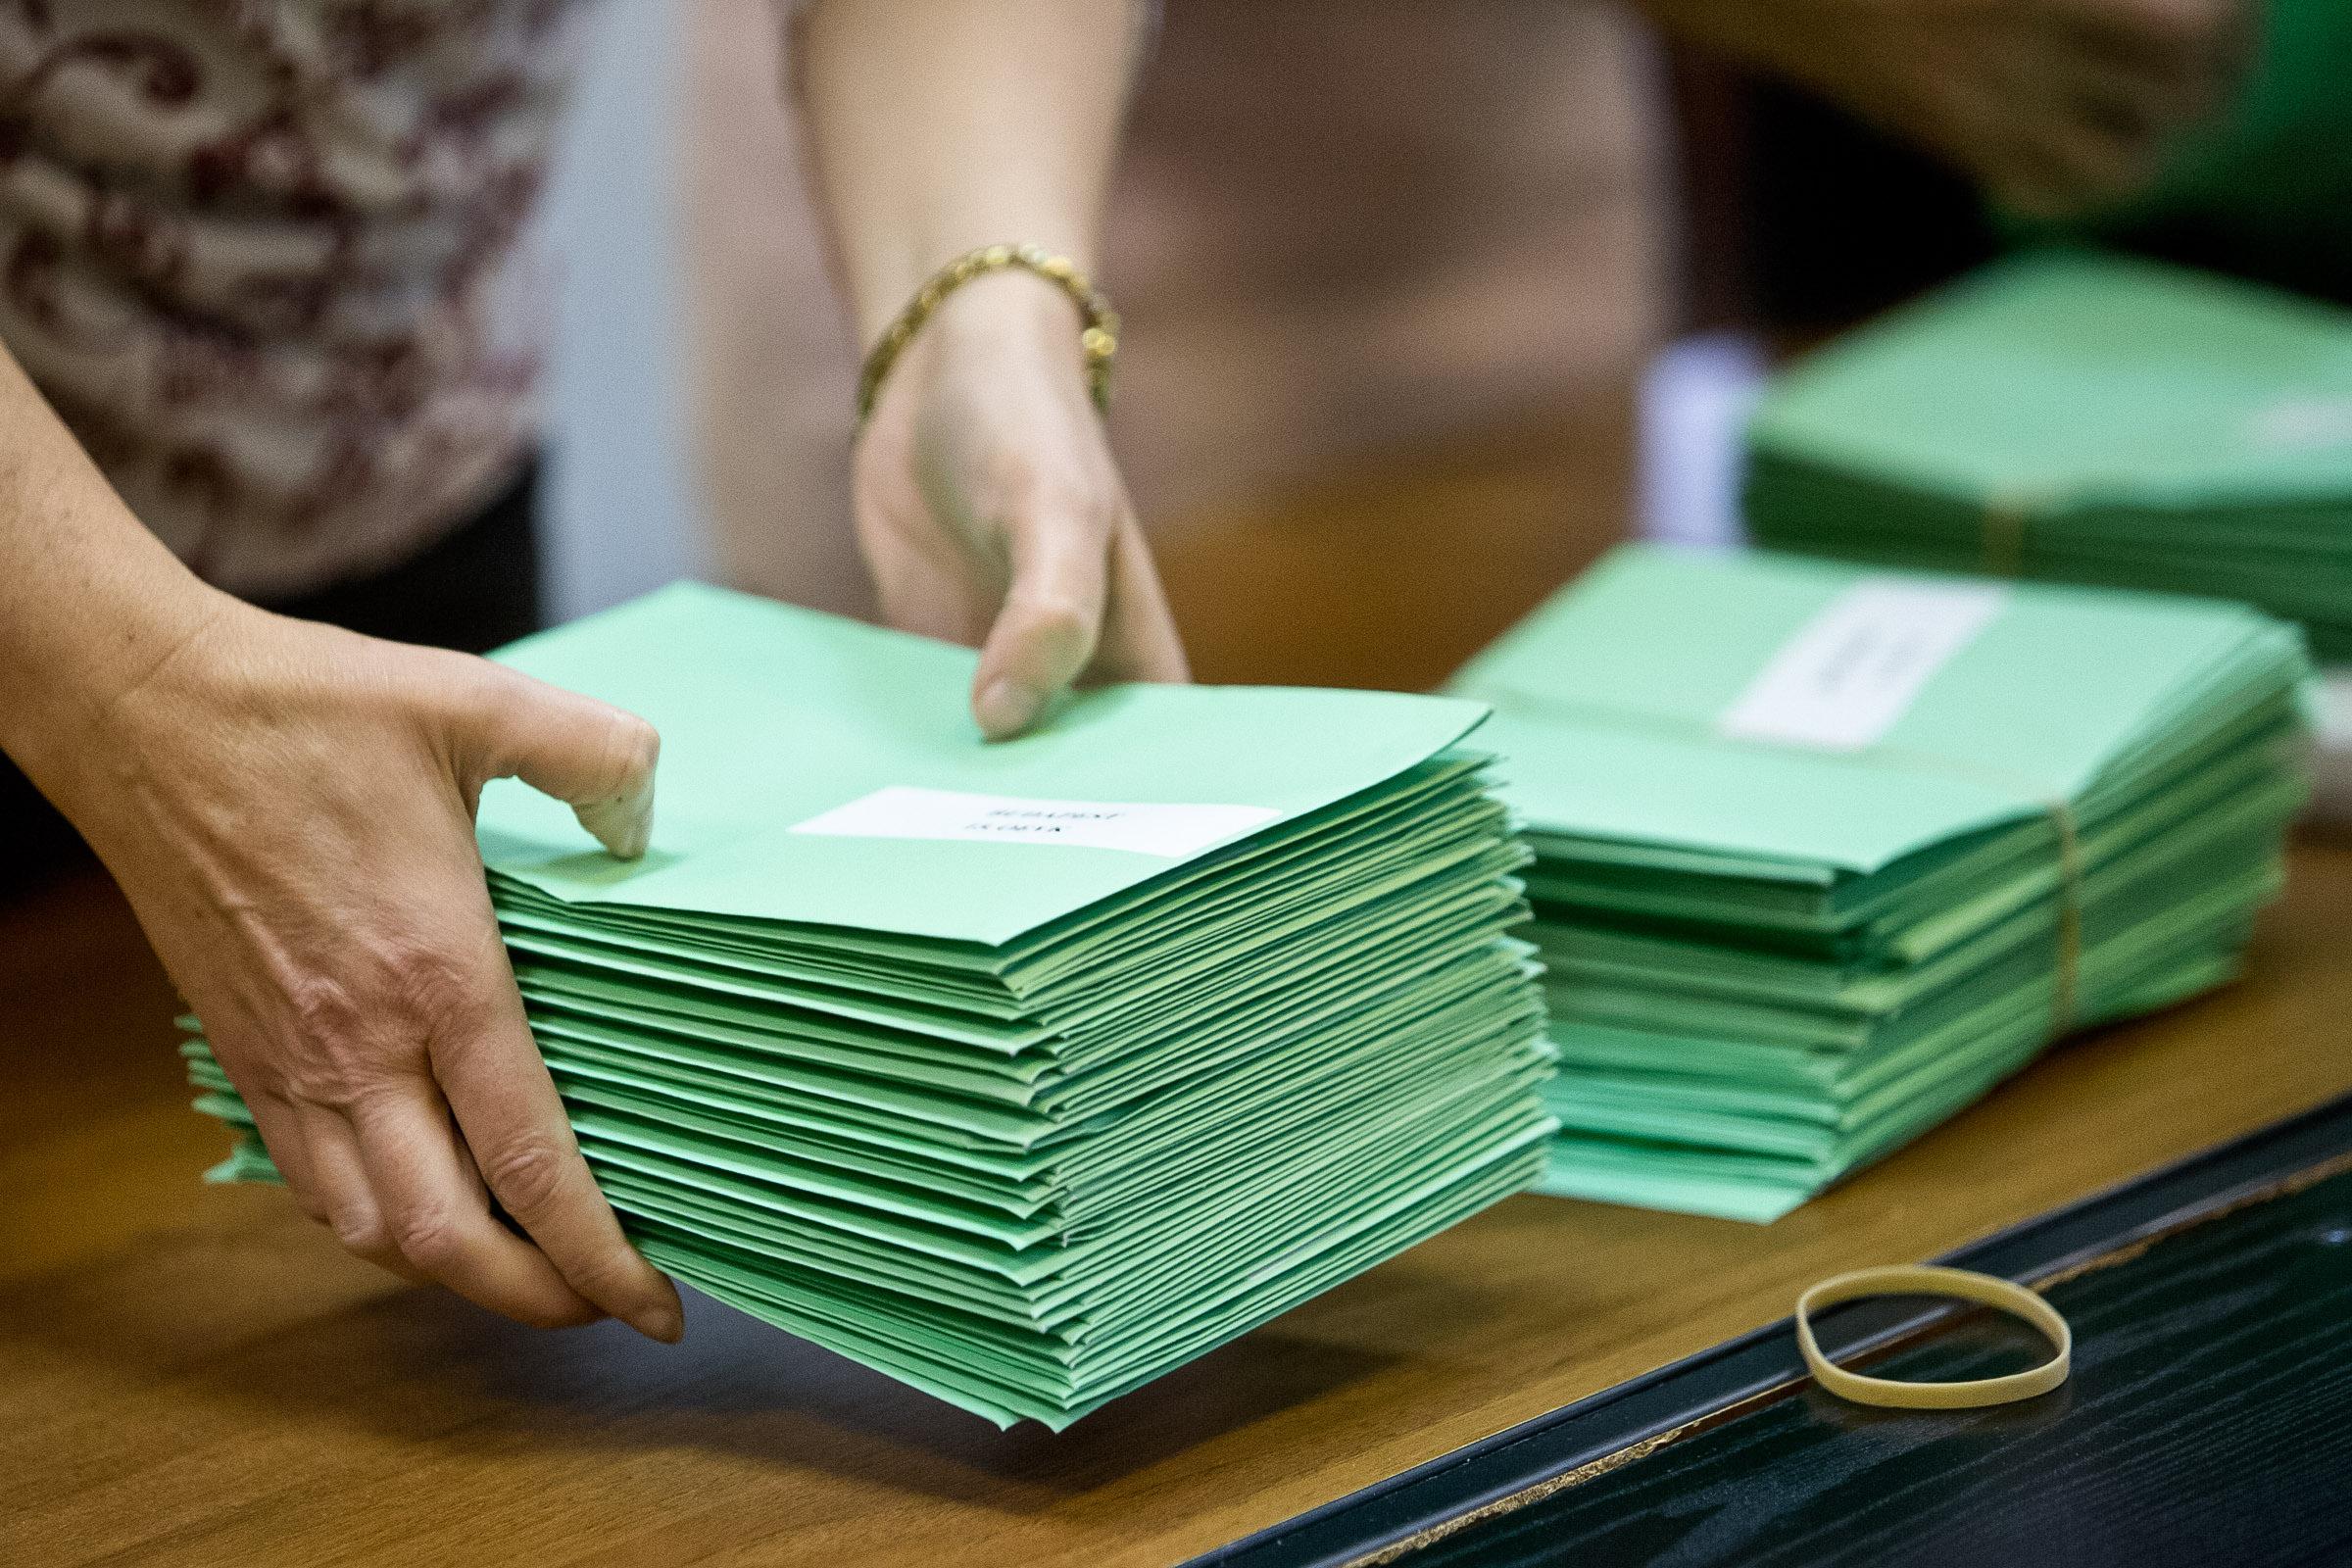 Invalid Votes To Be Recounted In Budapest Ward